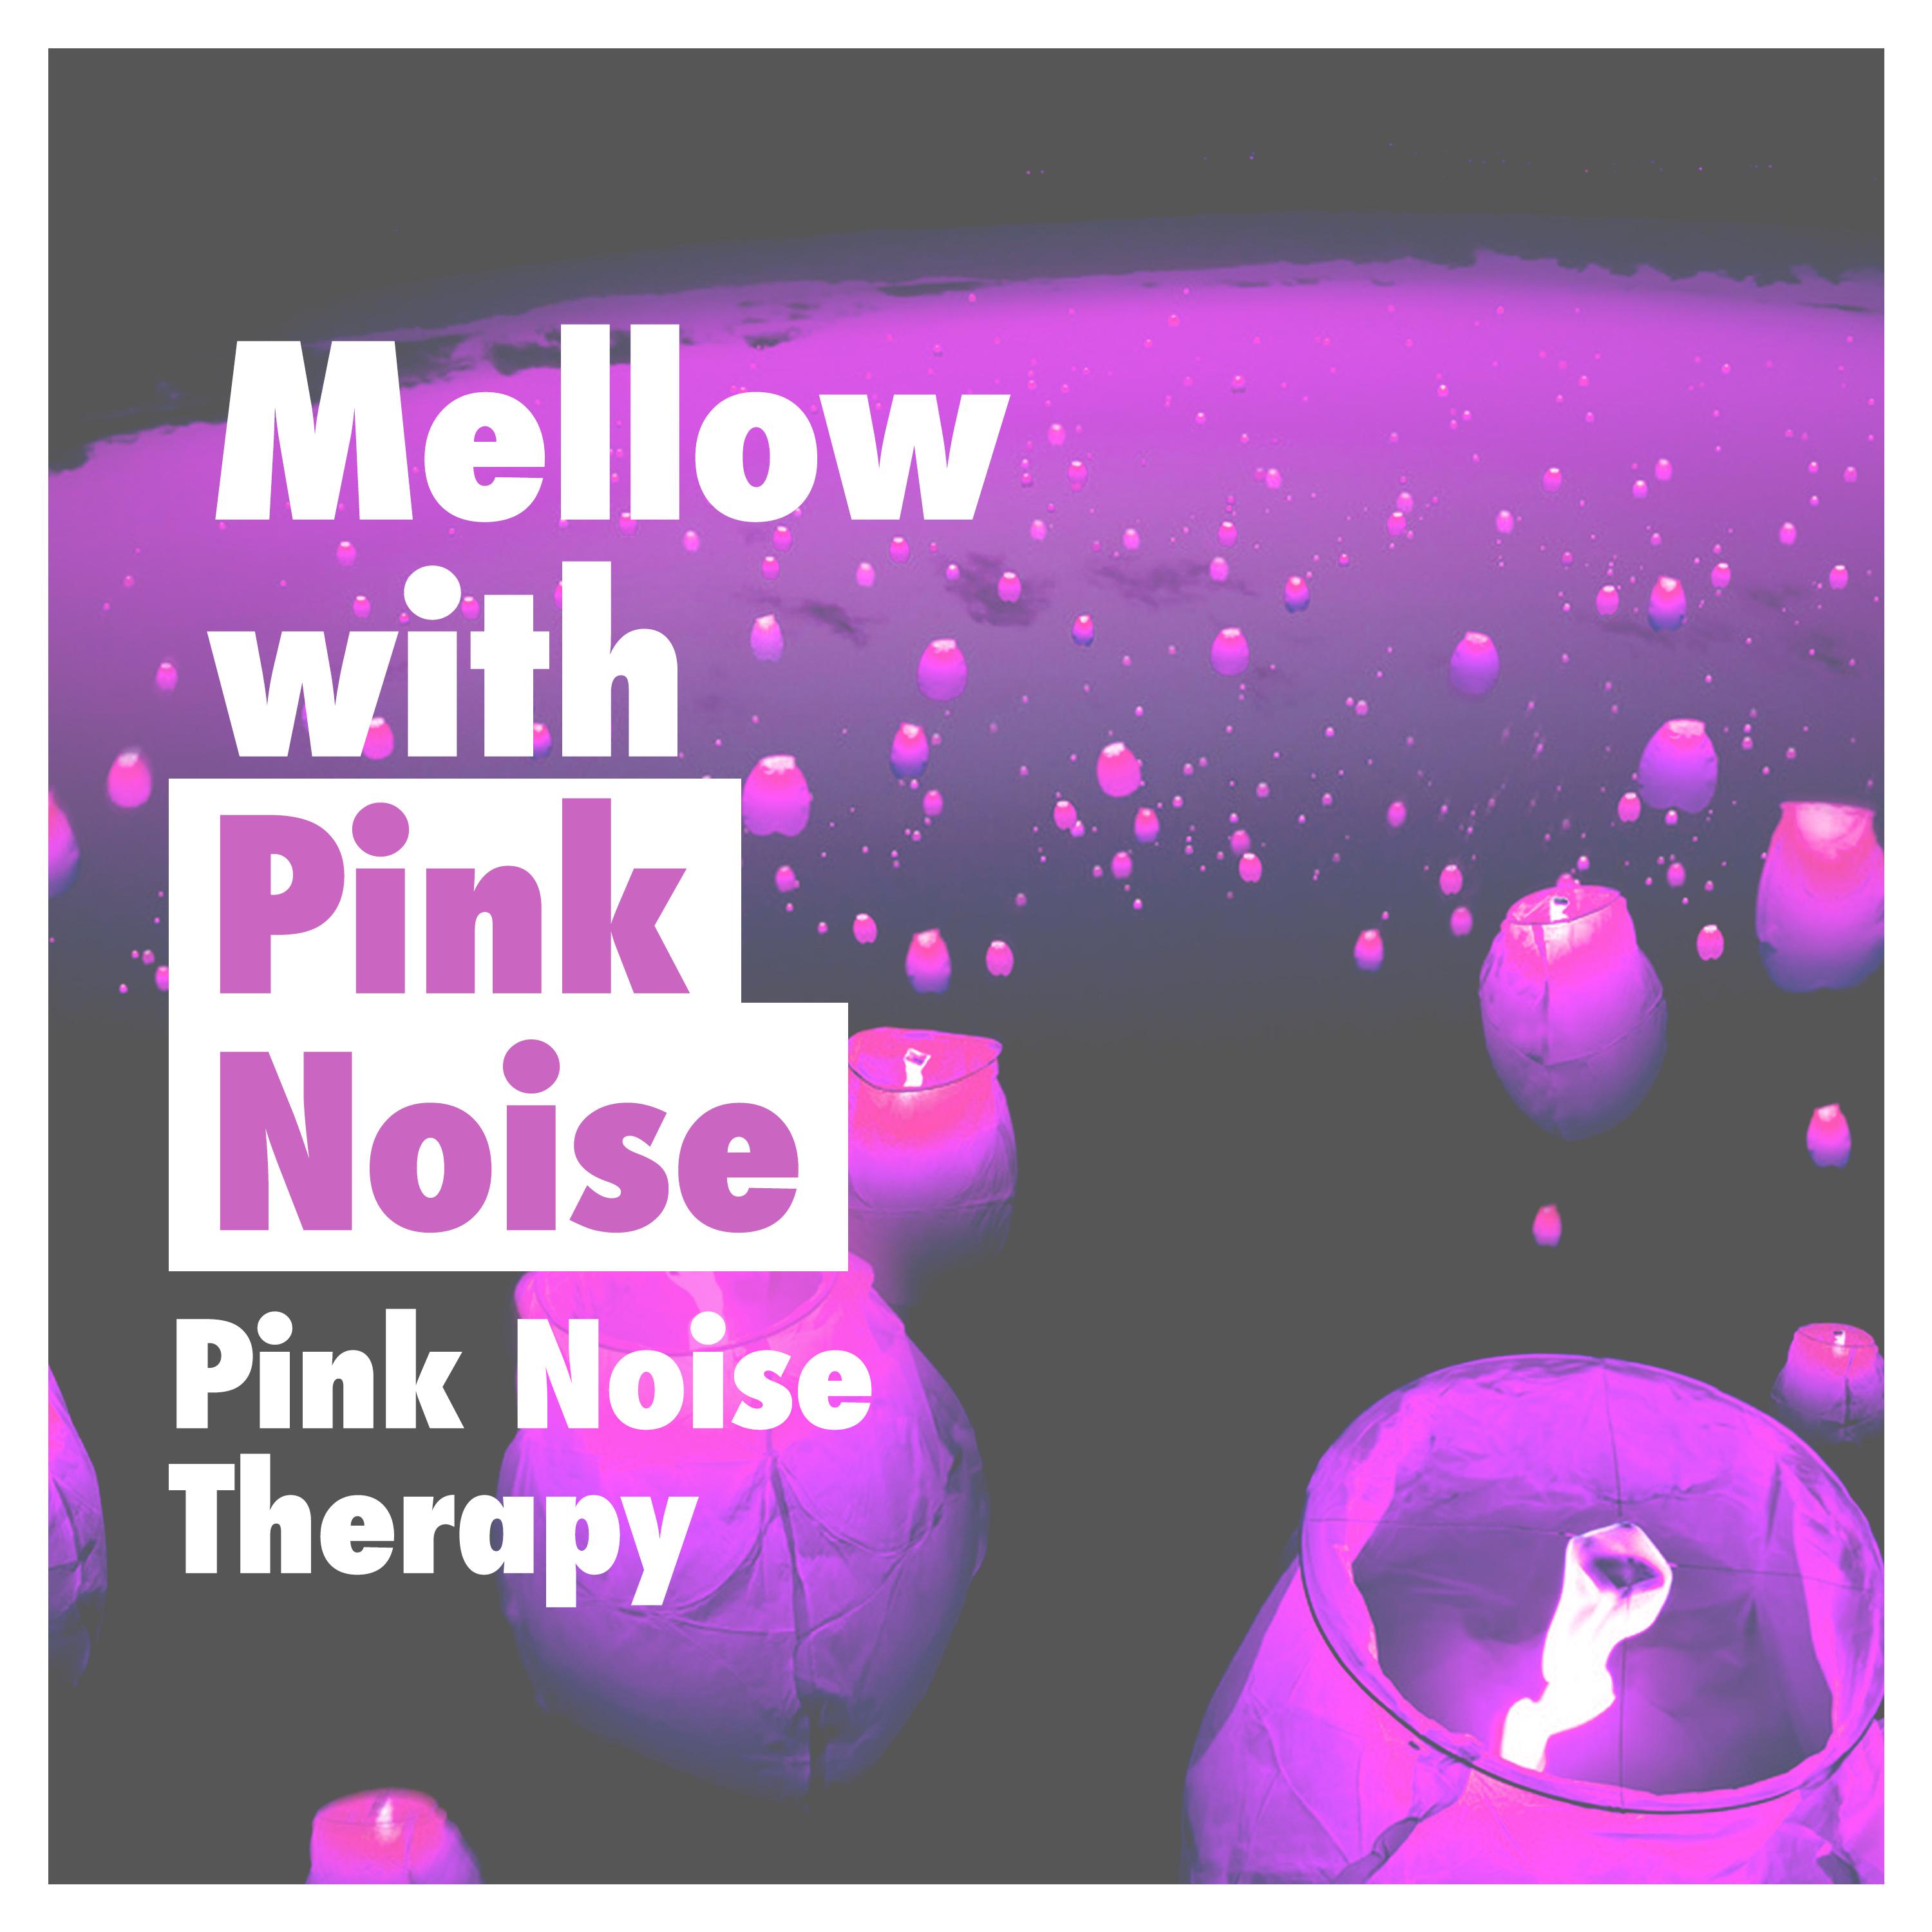 Mellow with Pink Noise